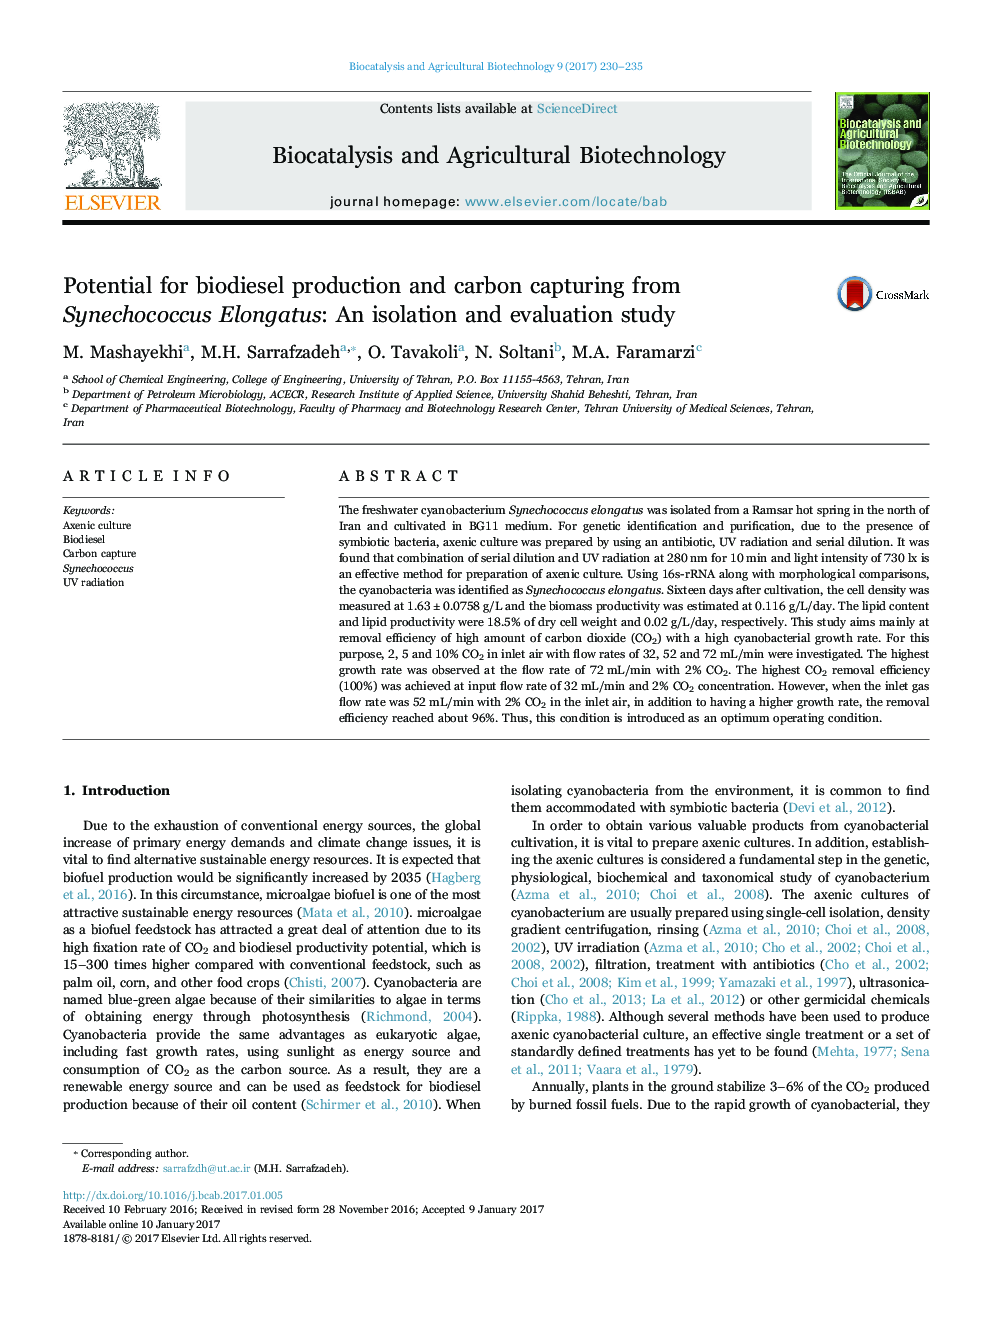 Potential for biodiesel production and carbon capturing from Synechococcus Elongatus: An isolation and evaluation study